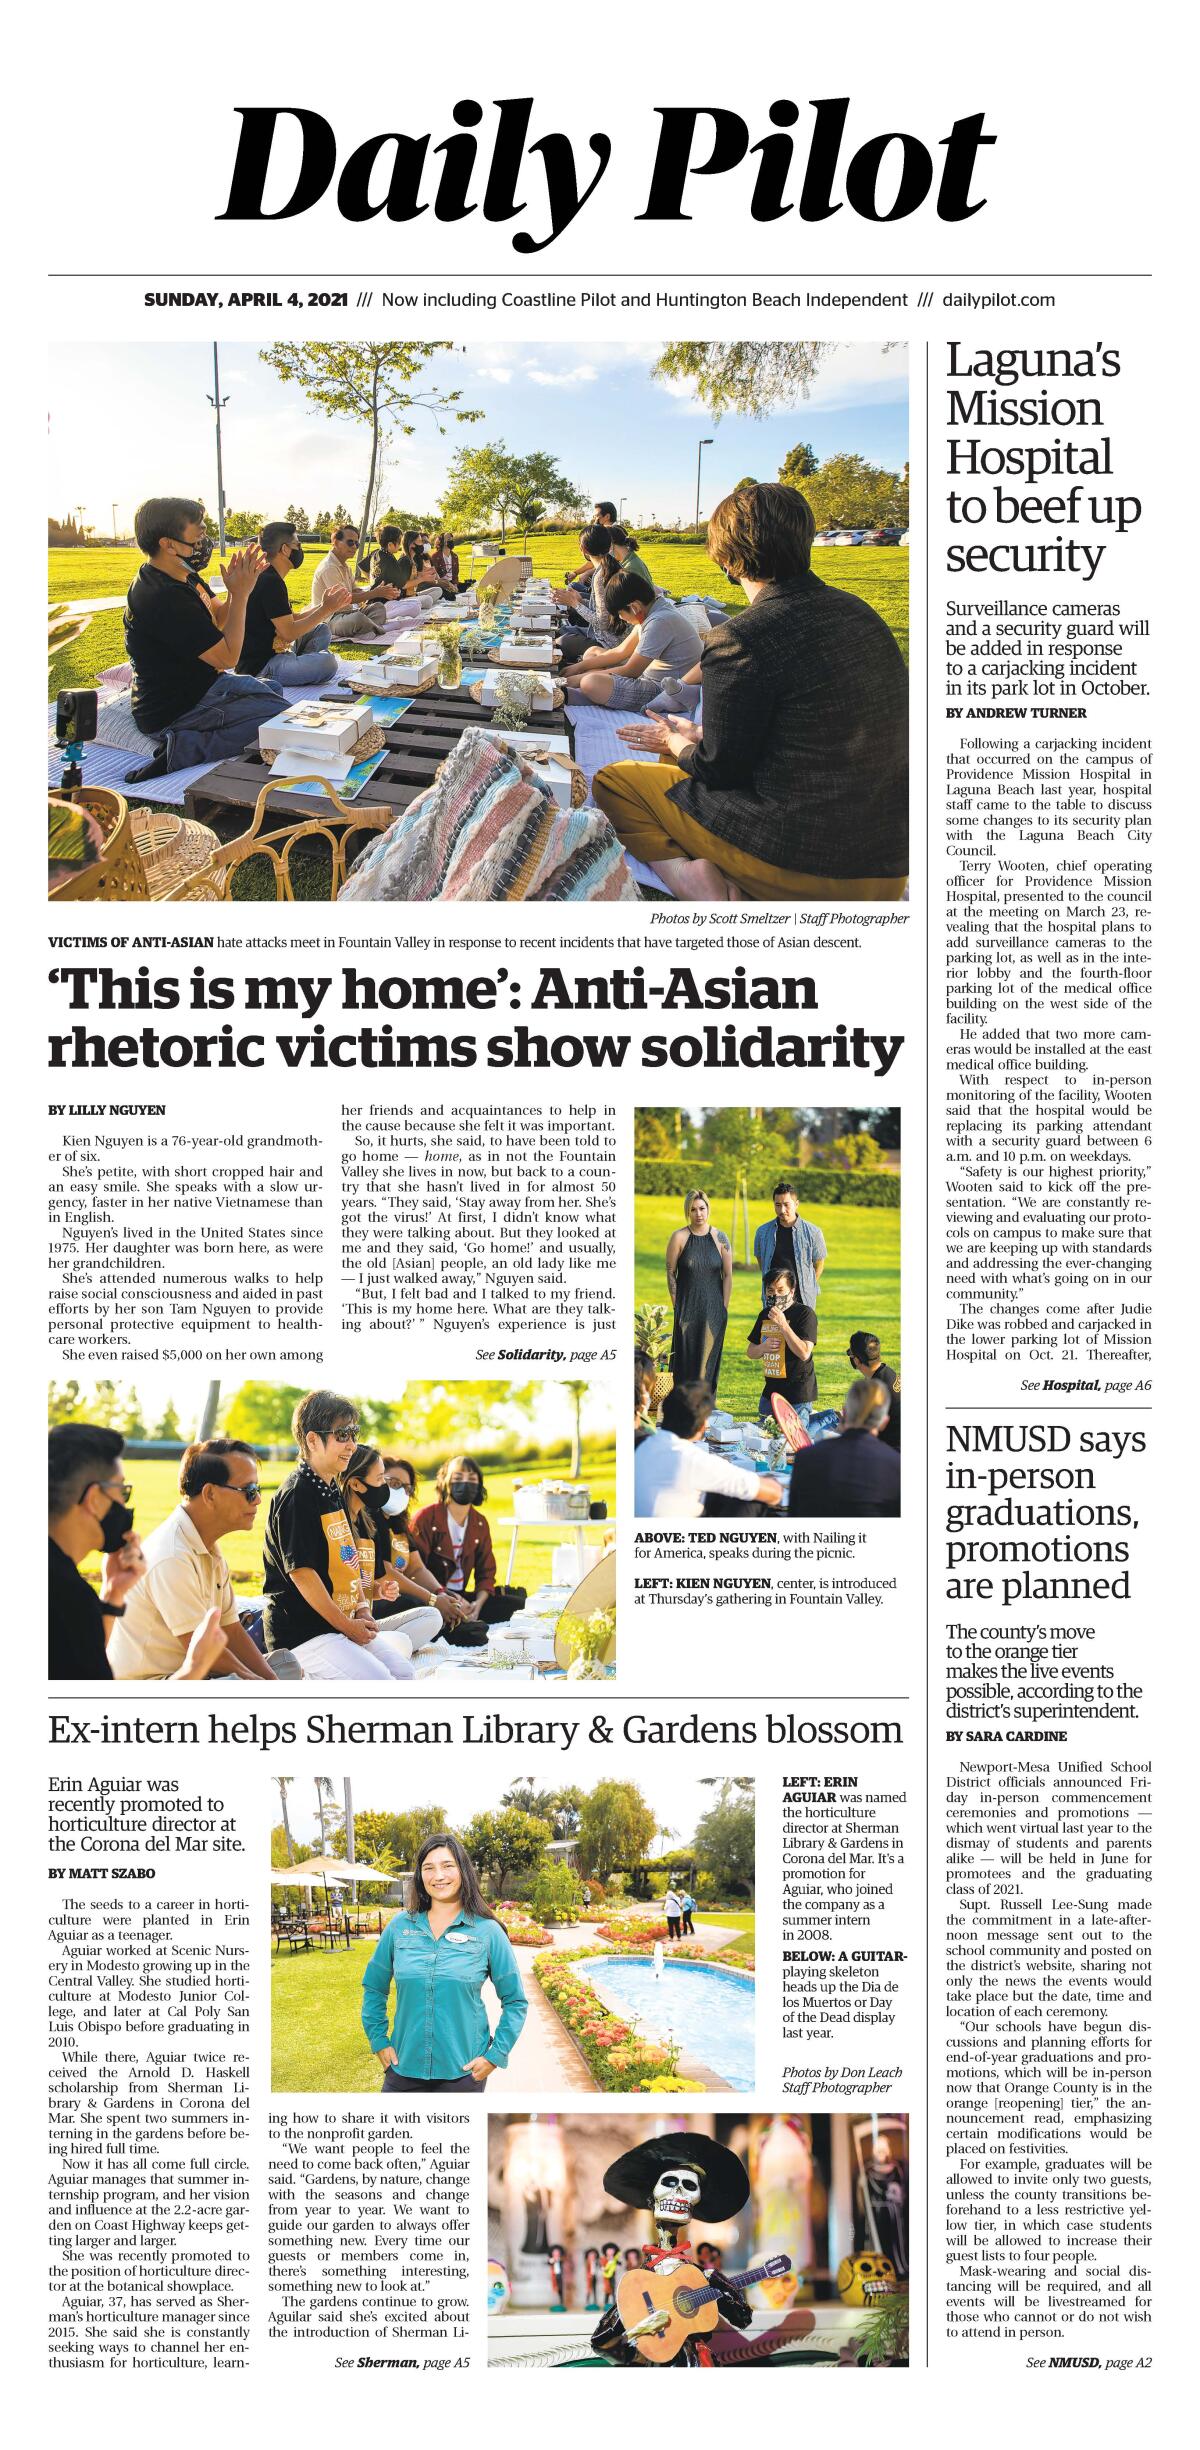 Front page of Daily Pilot e-newspaper for Sunday, April 4, 2021.